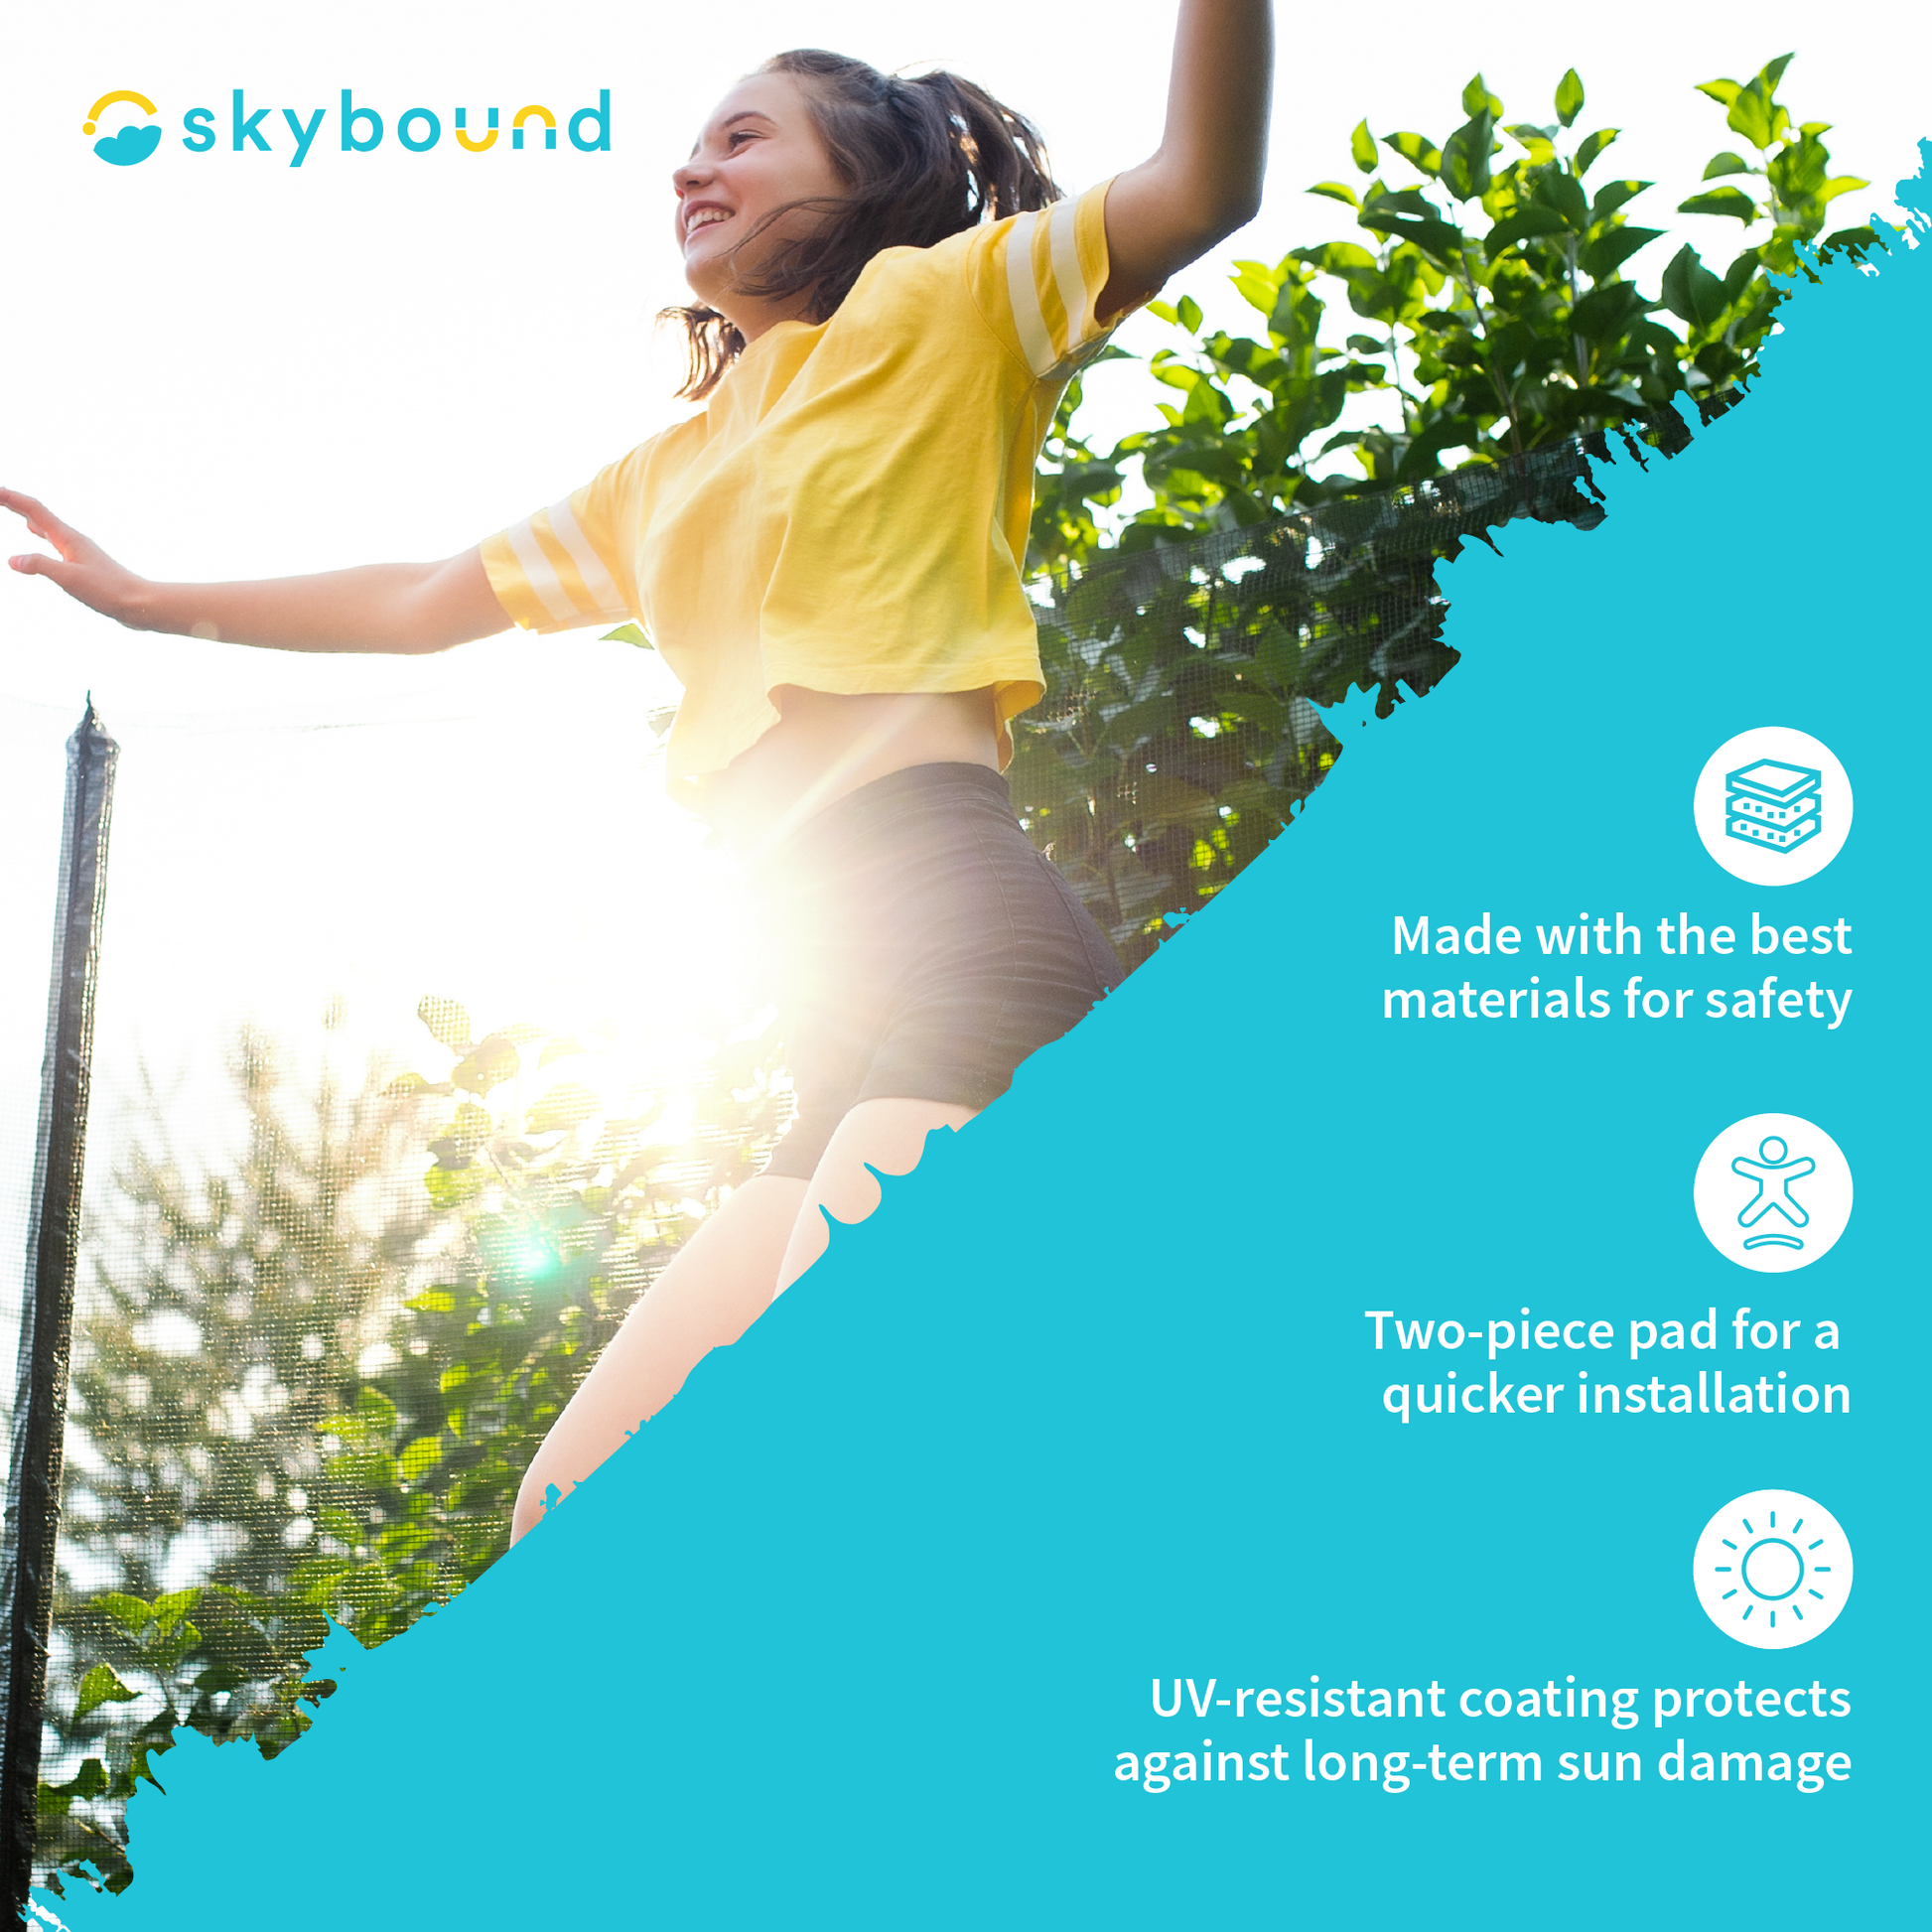 SkyBound:  Products are made with the best materials for safety.  Two-piece pad for a quicker installation.  UV-resistant coating protects against long-term sun damage.  